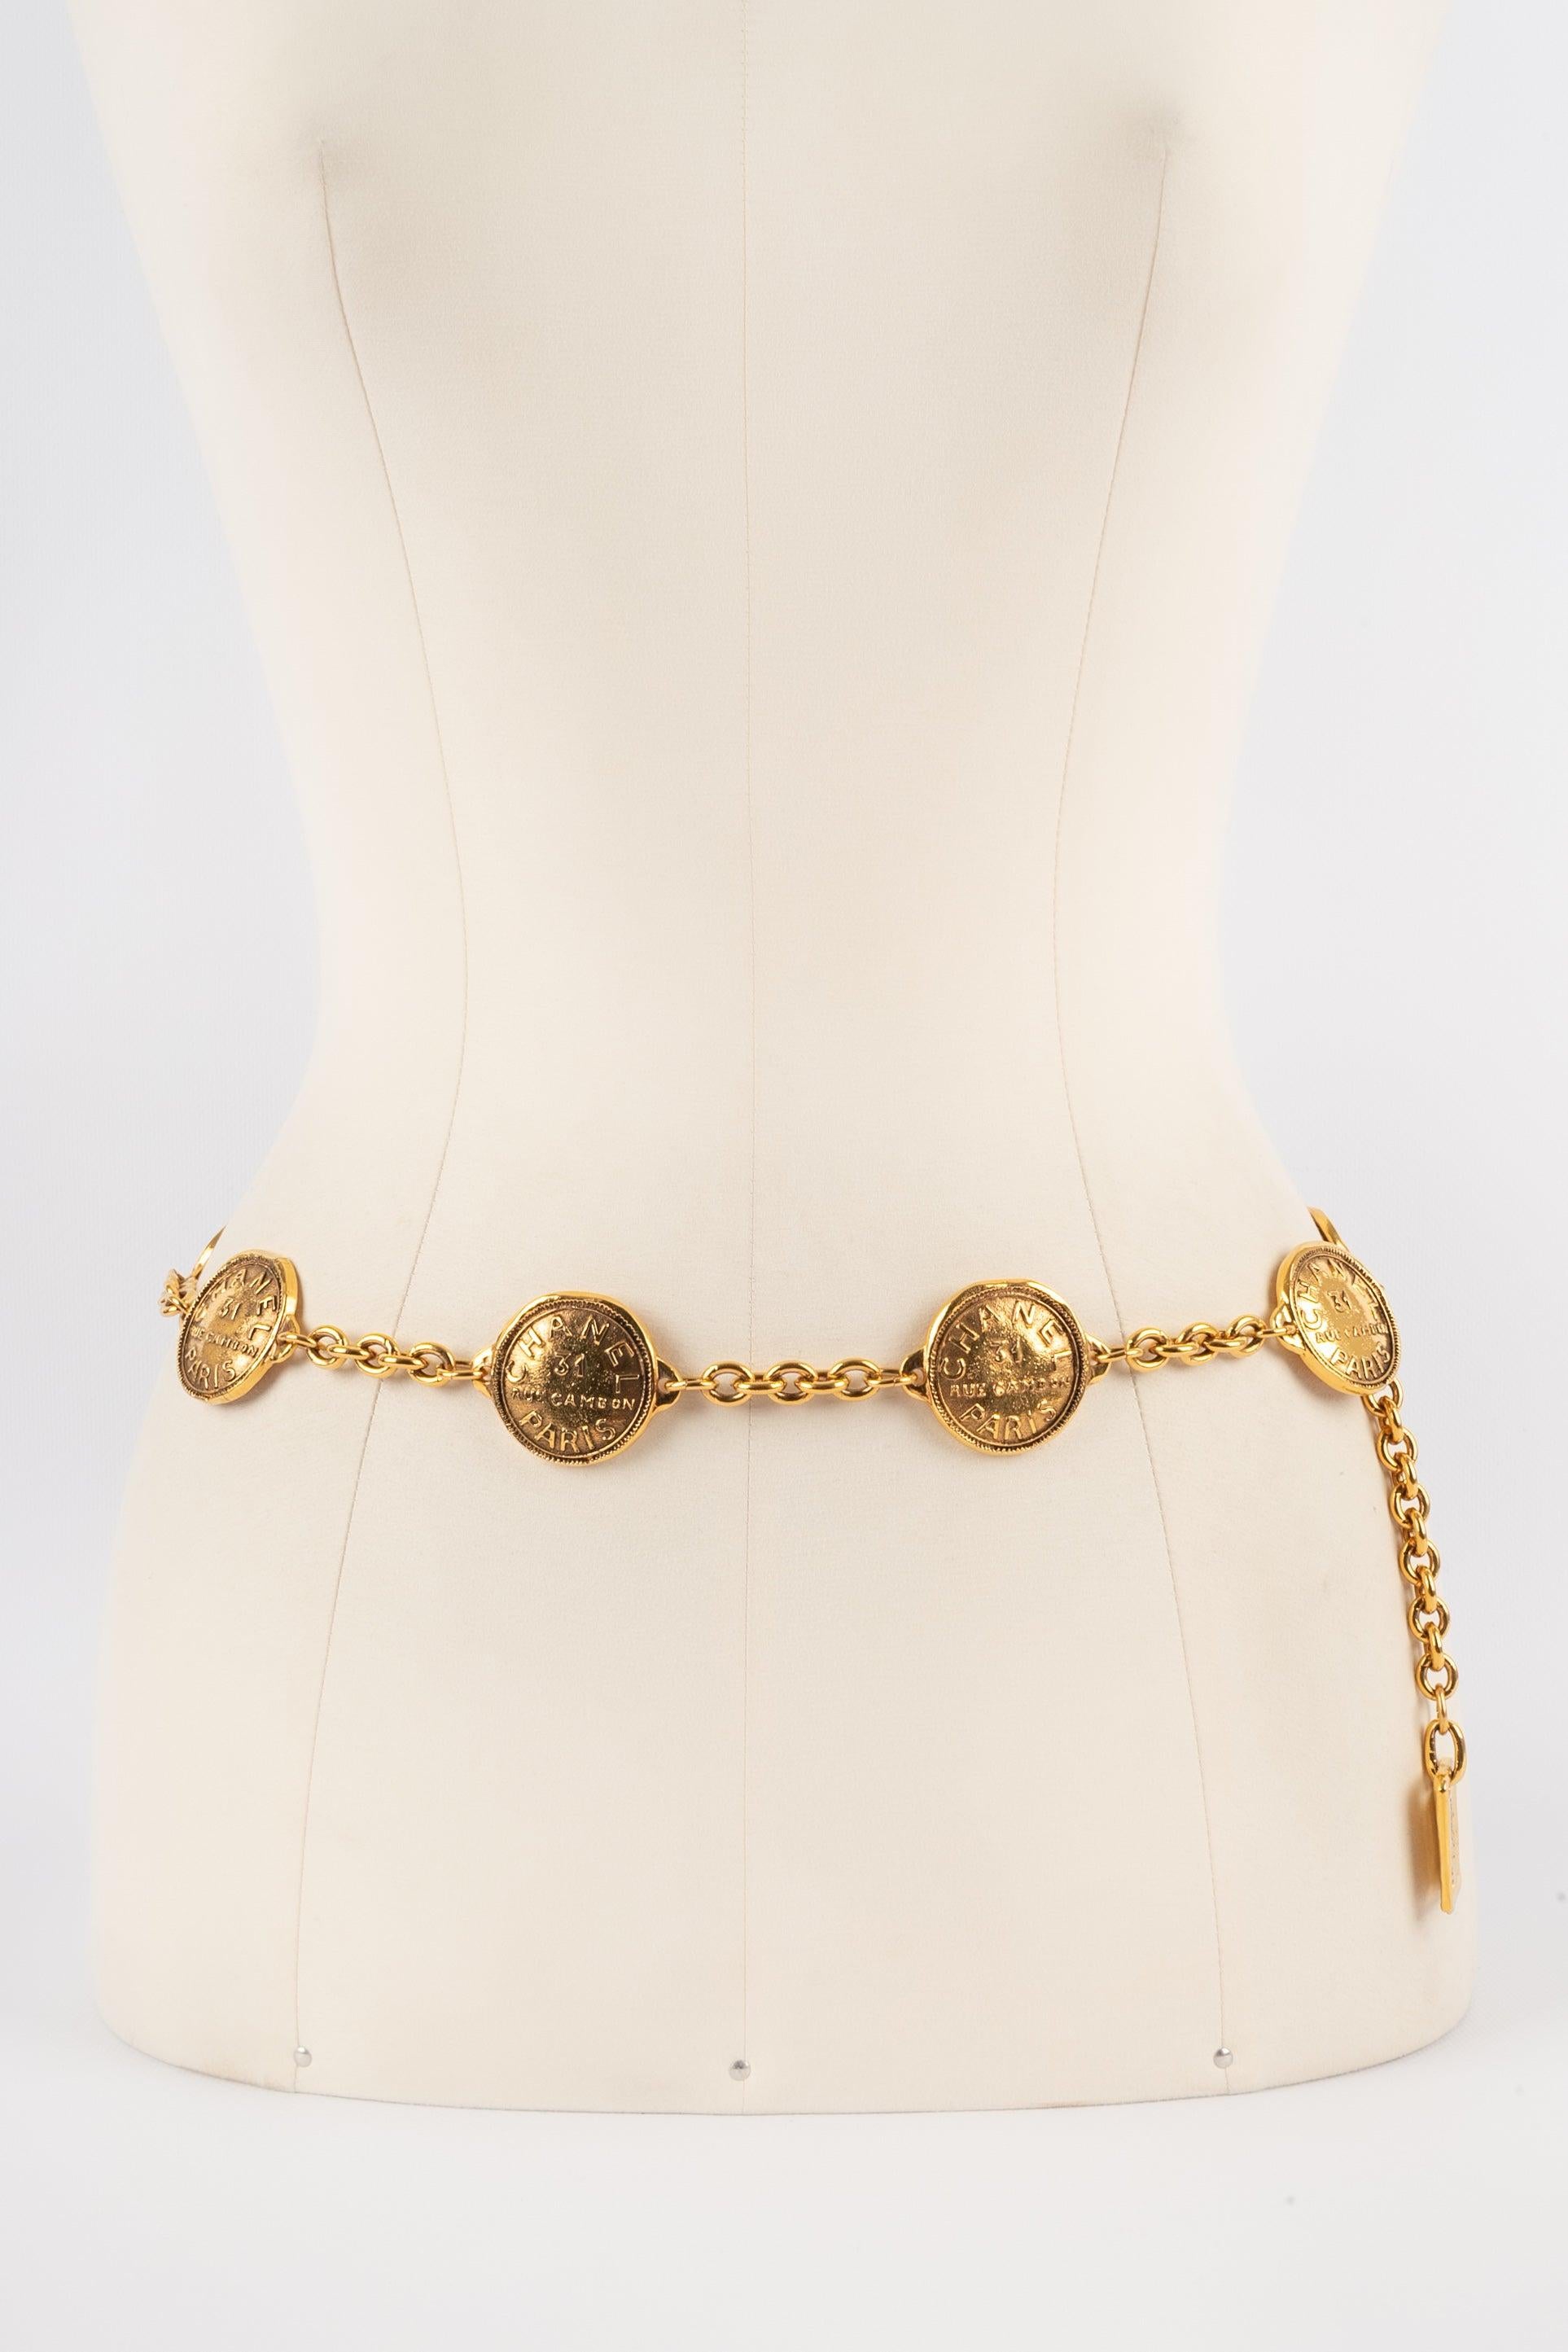 Women's Chanel Belt of Chains and Medallions Representing Coins, 1980s